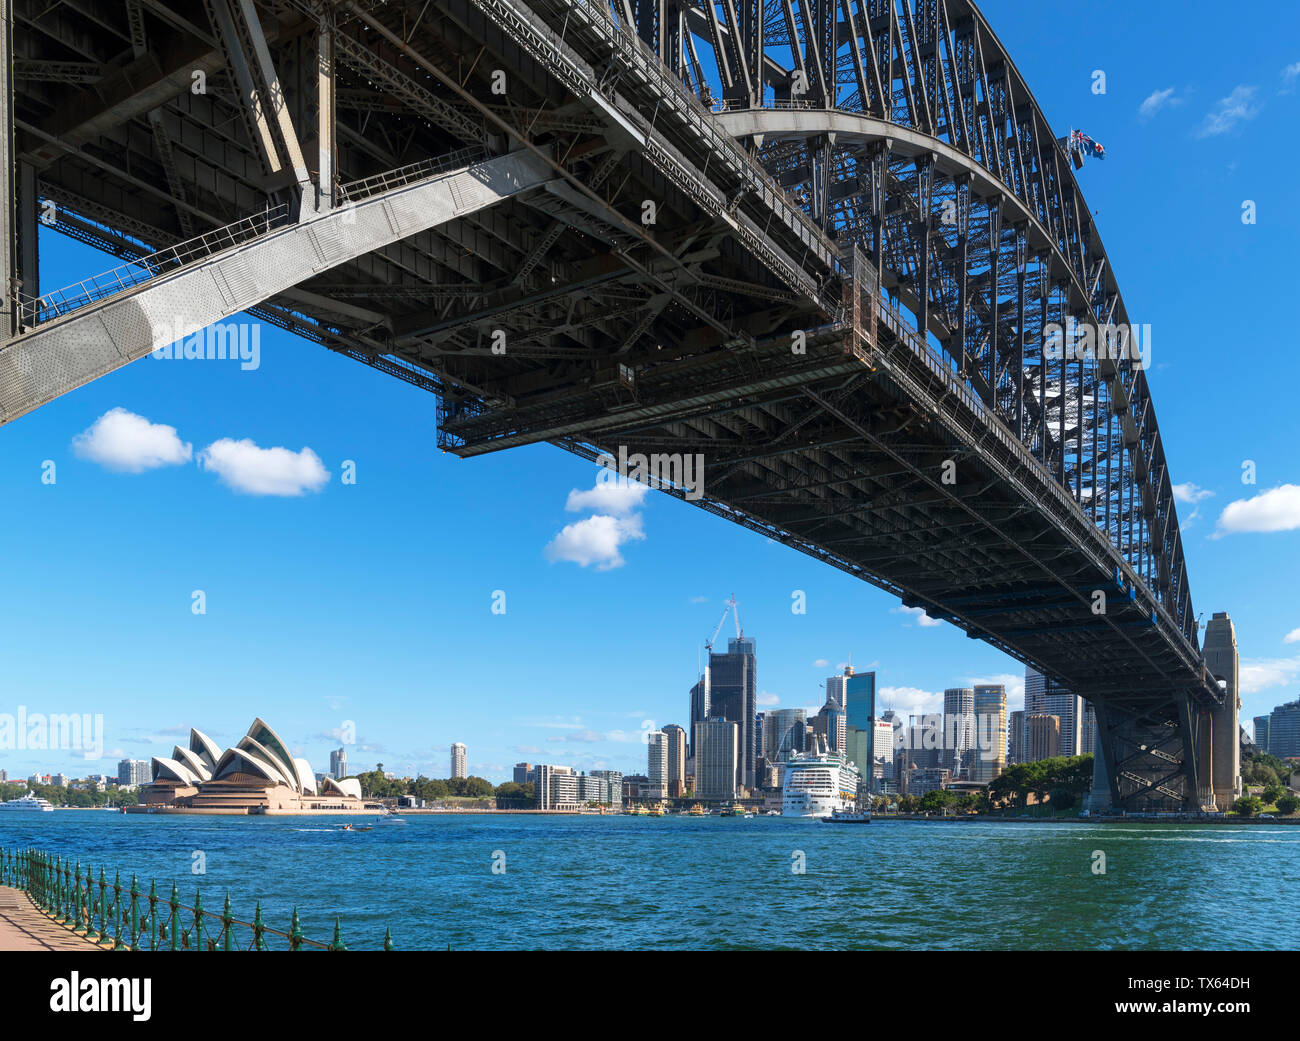 Sydney Harbour Bridge at Milsons Point looking towards Sydney Opera House and the Central Business District, Sydney, New South Wales, Australia Stock Photo